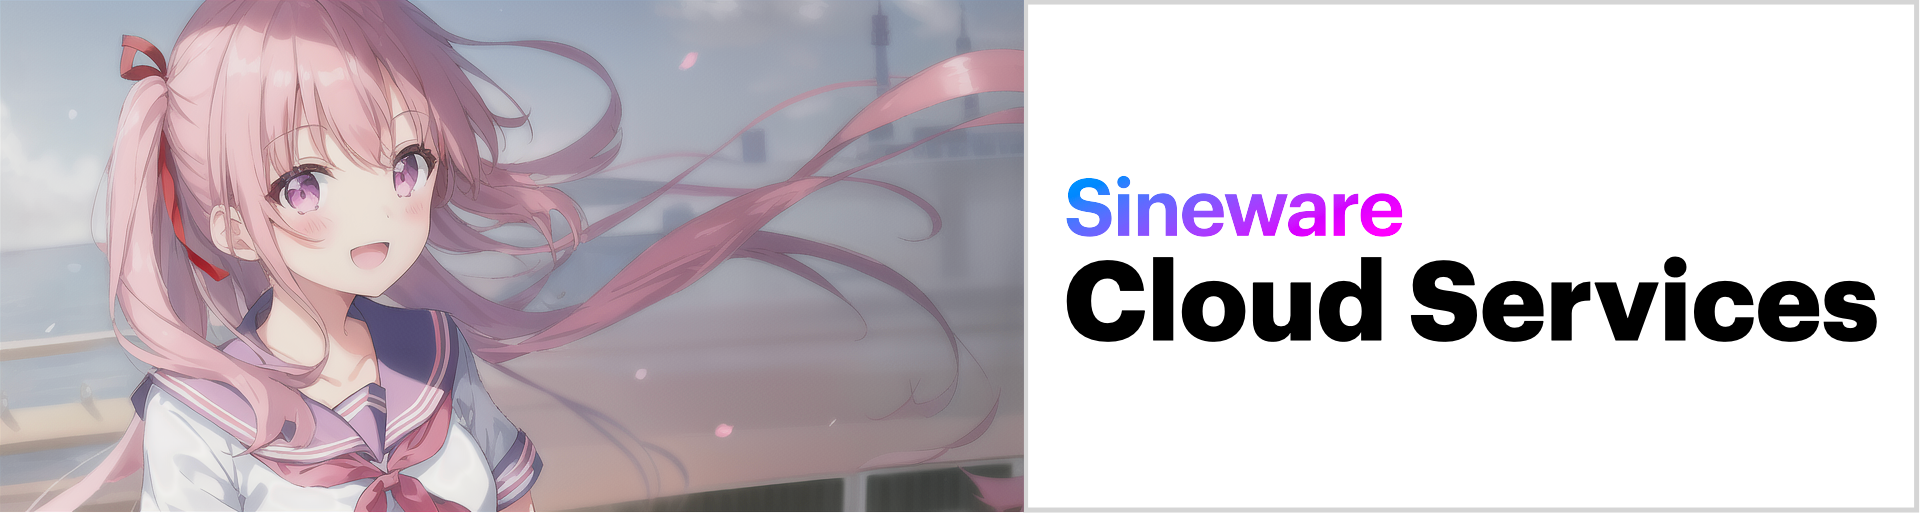 Sineware Cloud Services Logo with Anime Girl Sineware-Chan